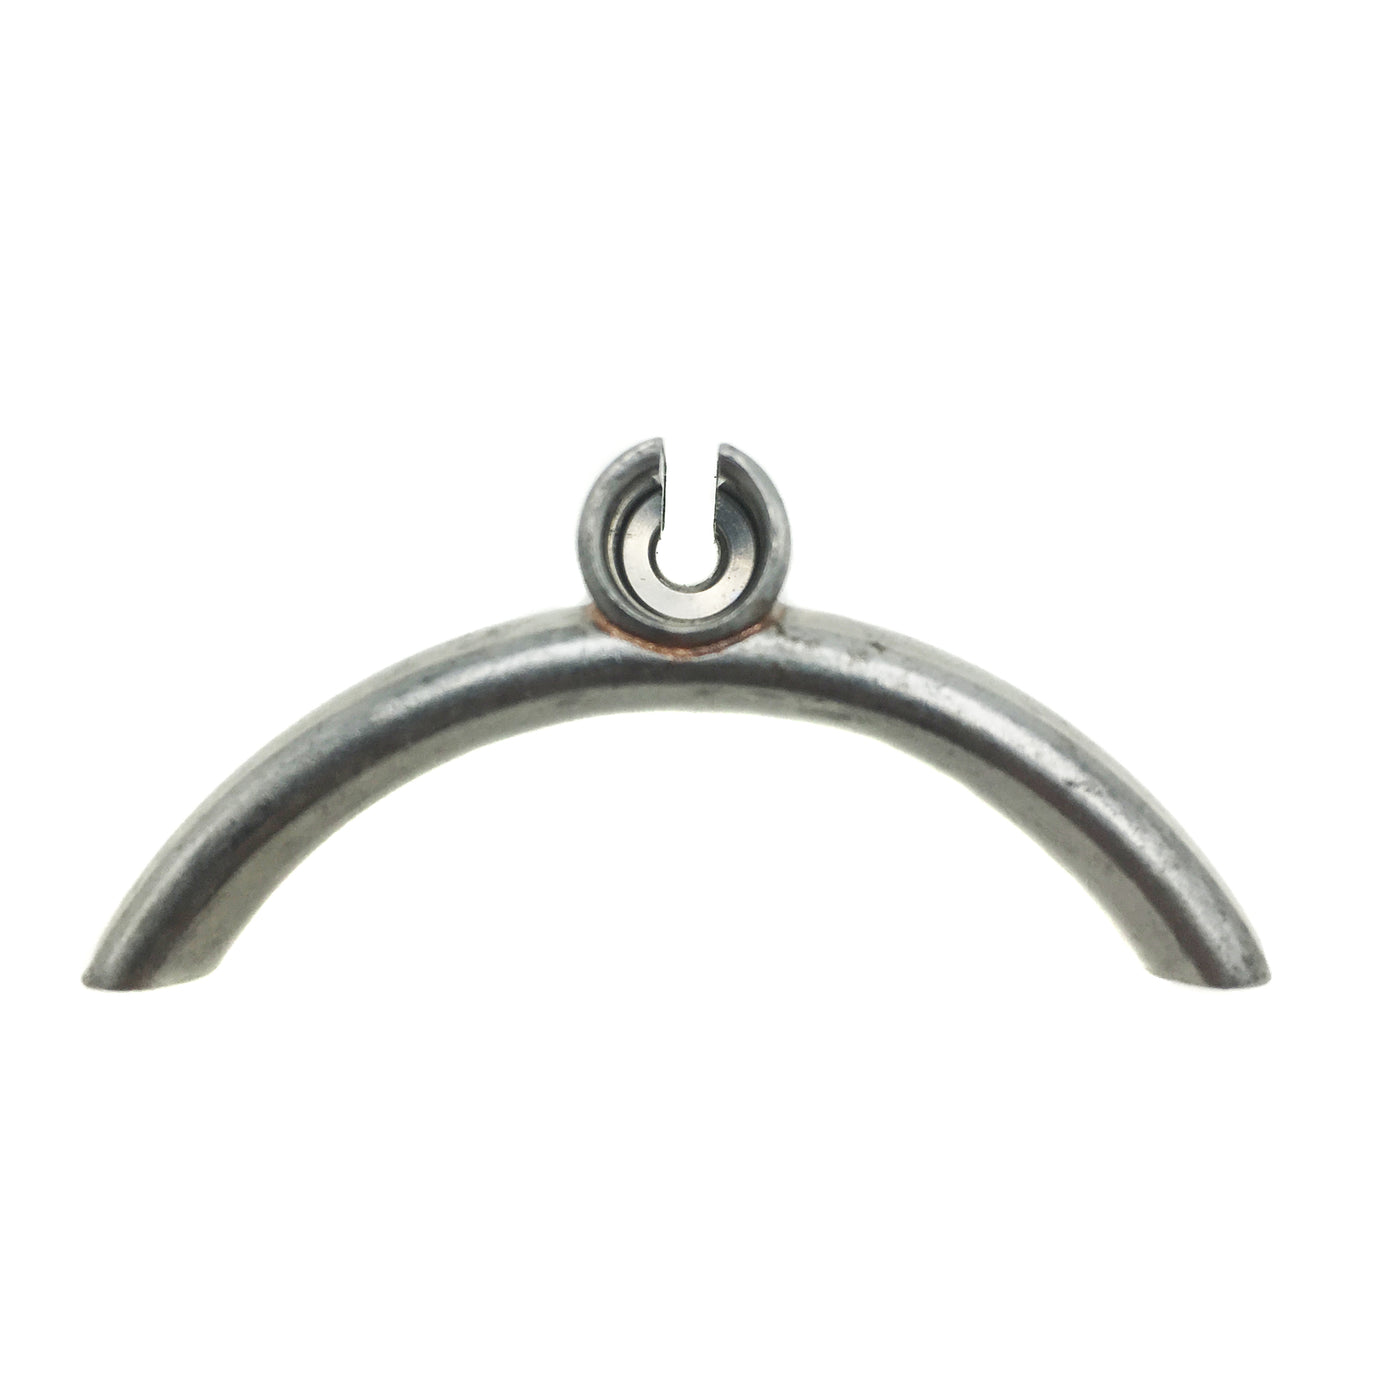 Seat stay bridge cable stop - 51mm wide